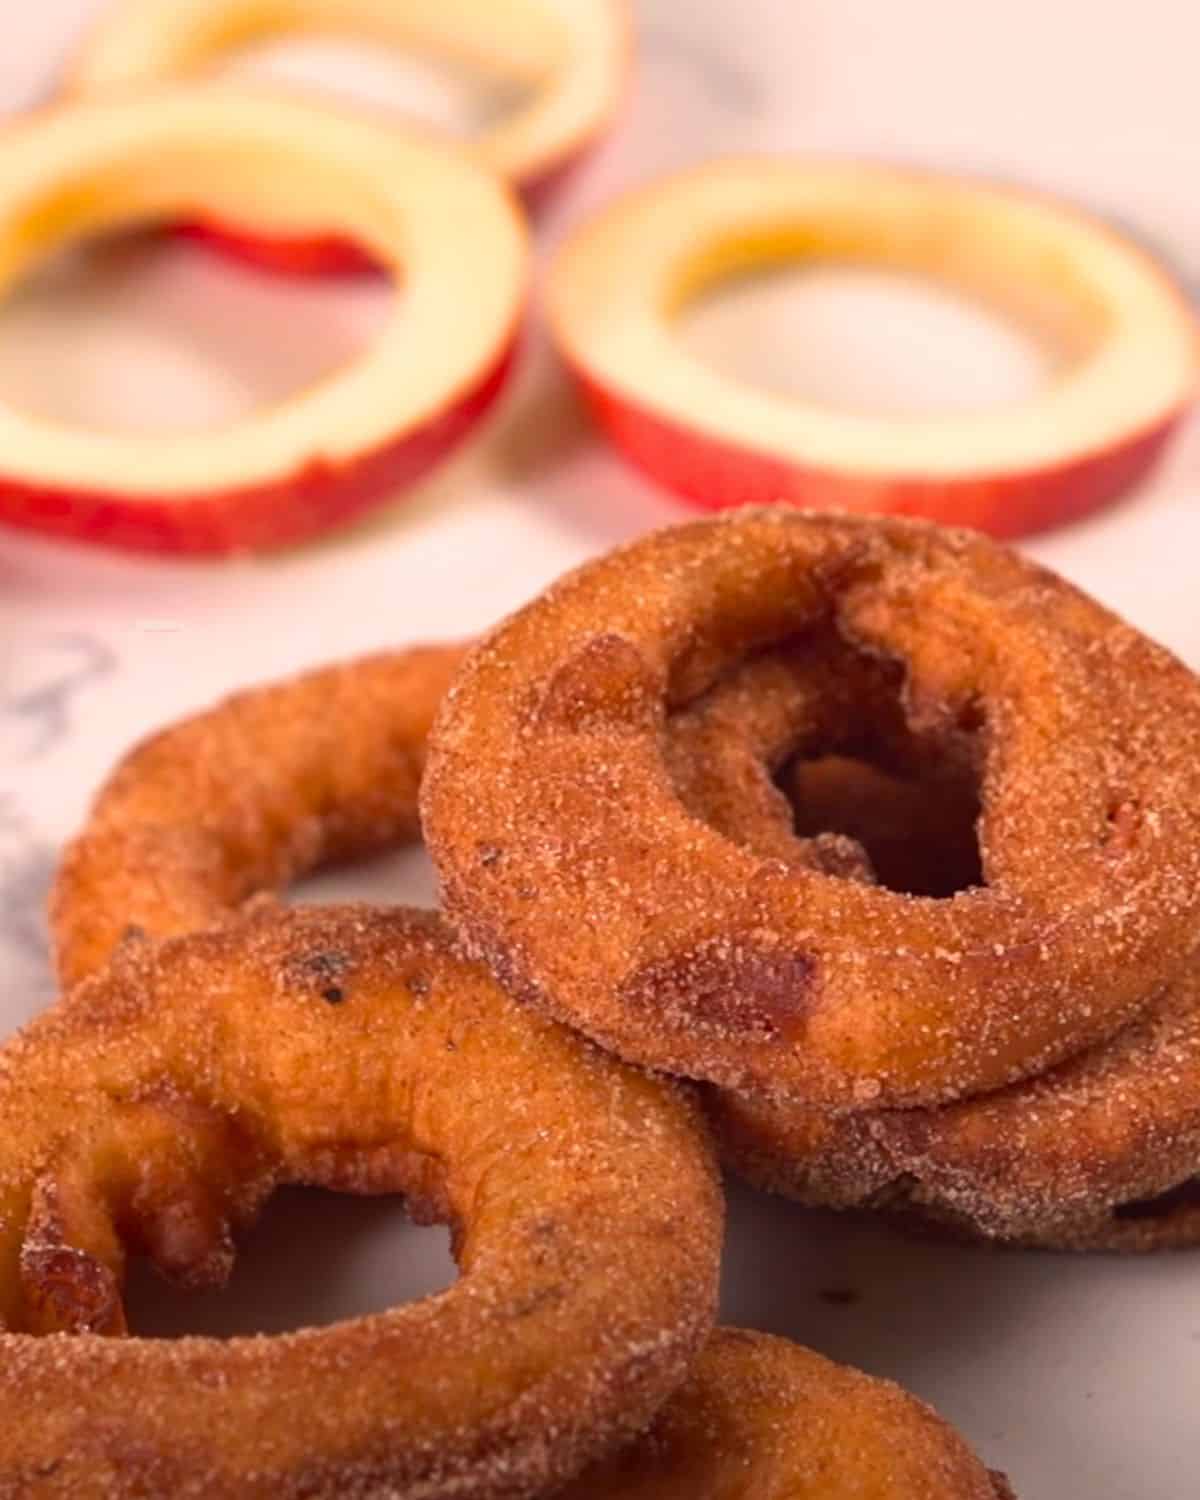 Apple cinnamon rings with apples in background.